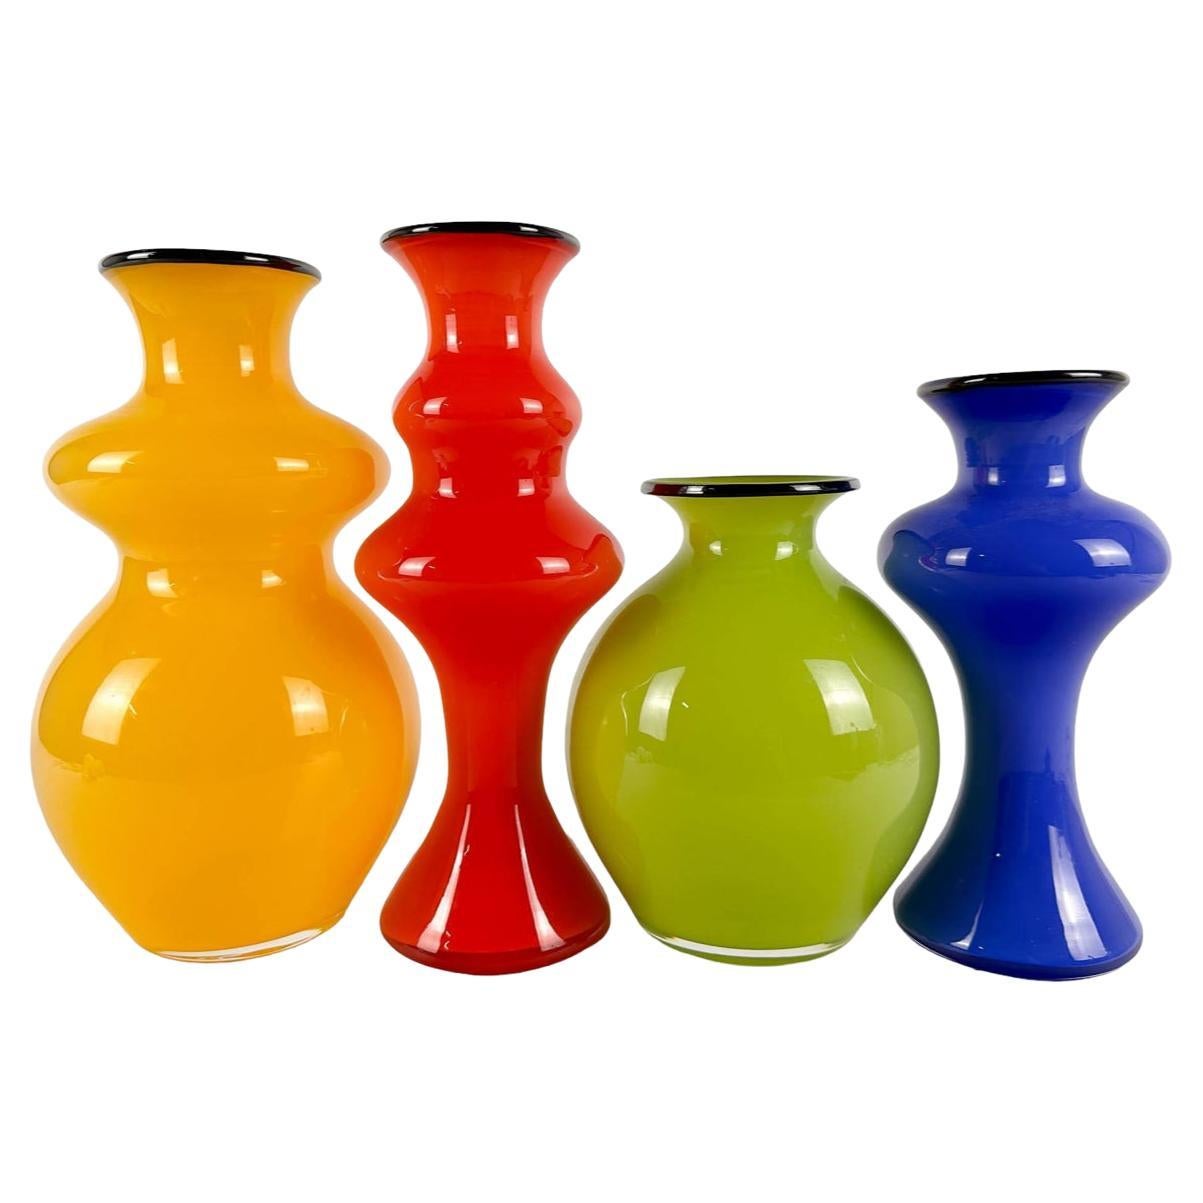 Colorful Four Piece Art Glass Decanter Collection by Strombergshyttan Studio For Sale